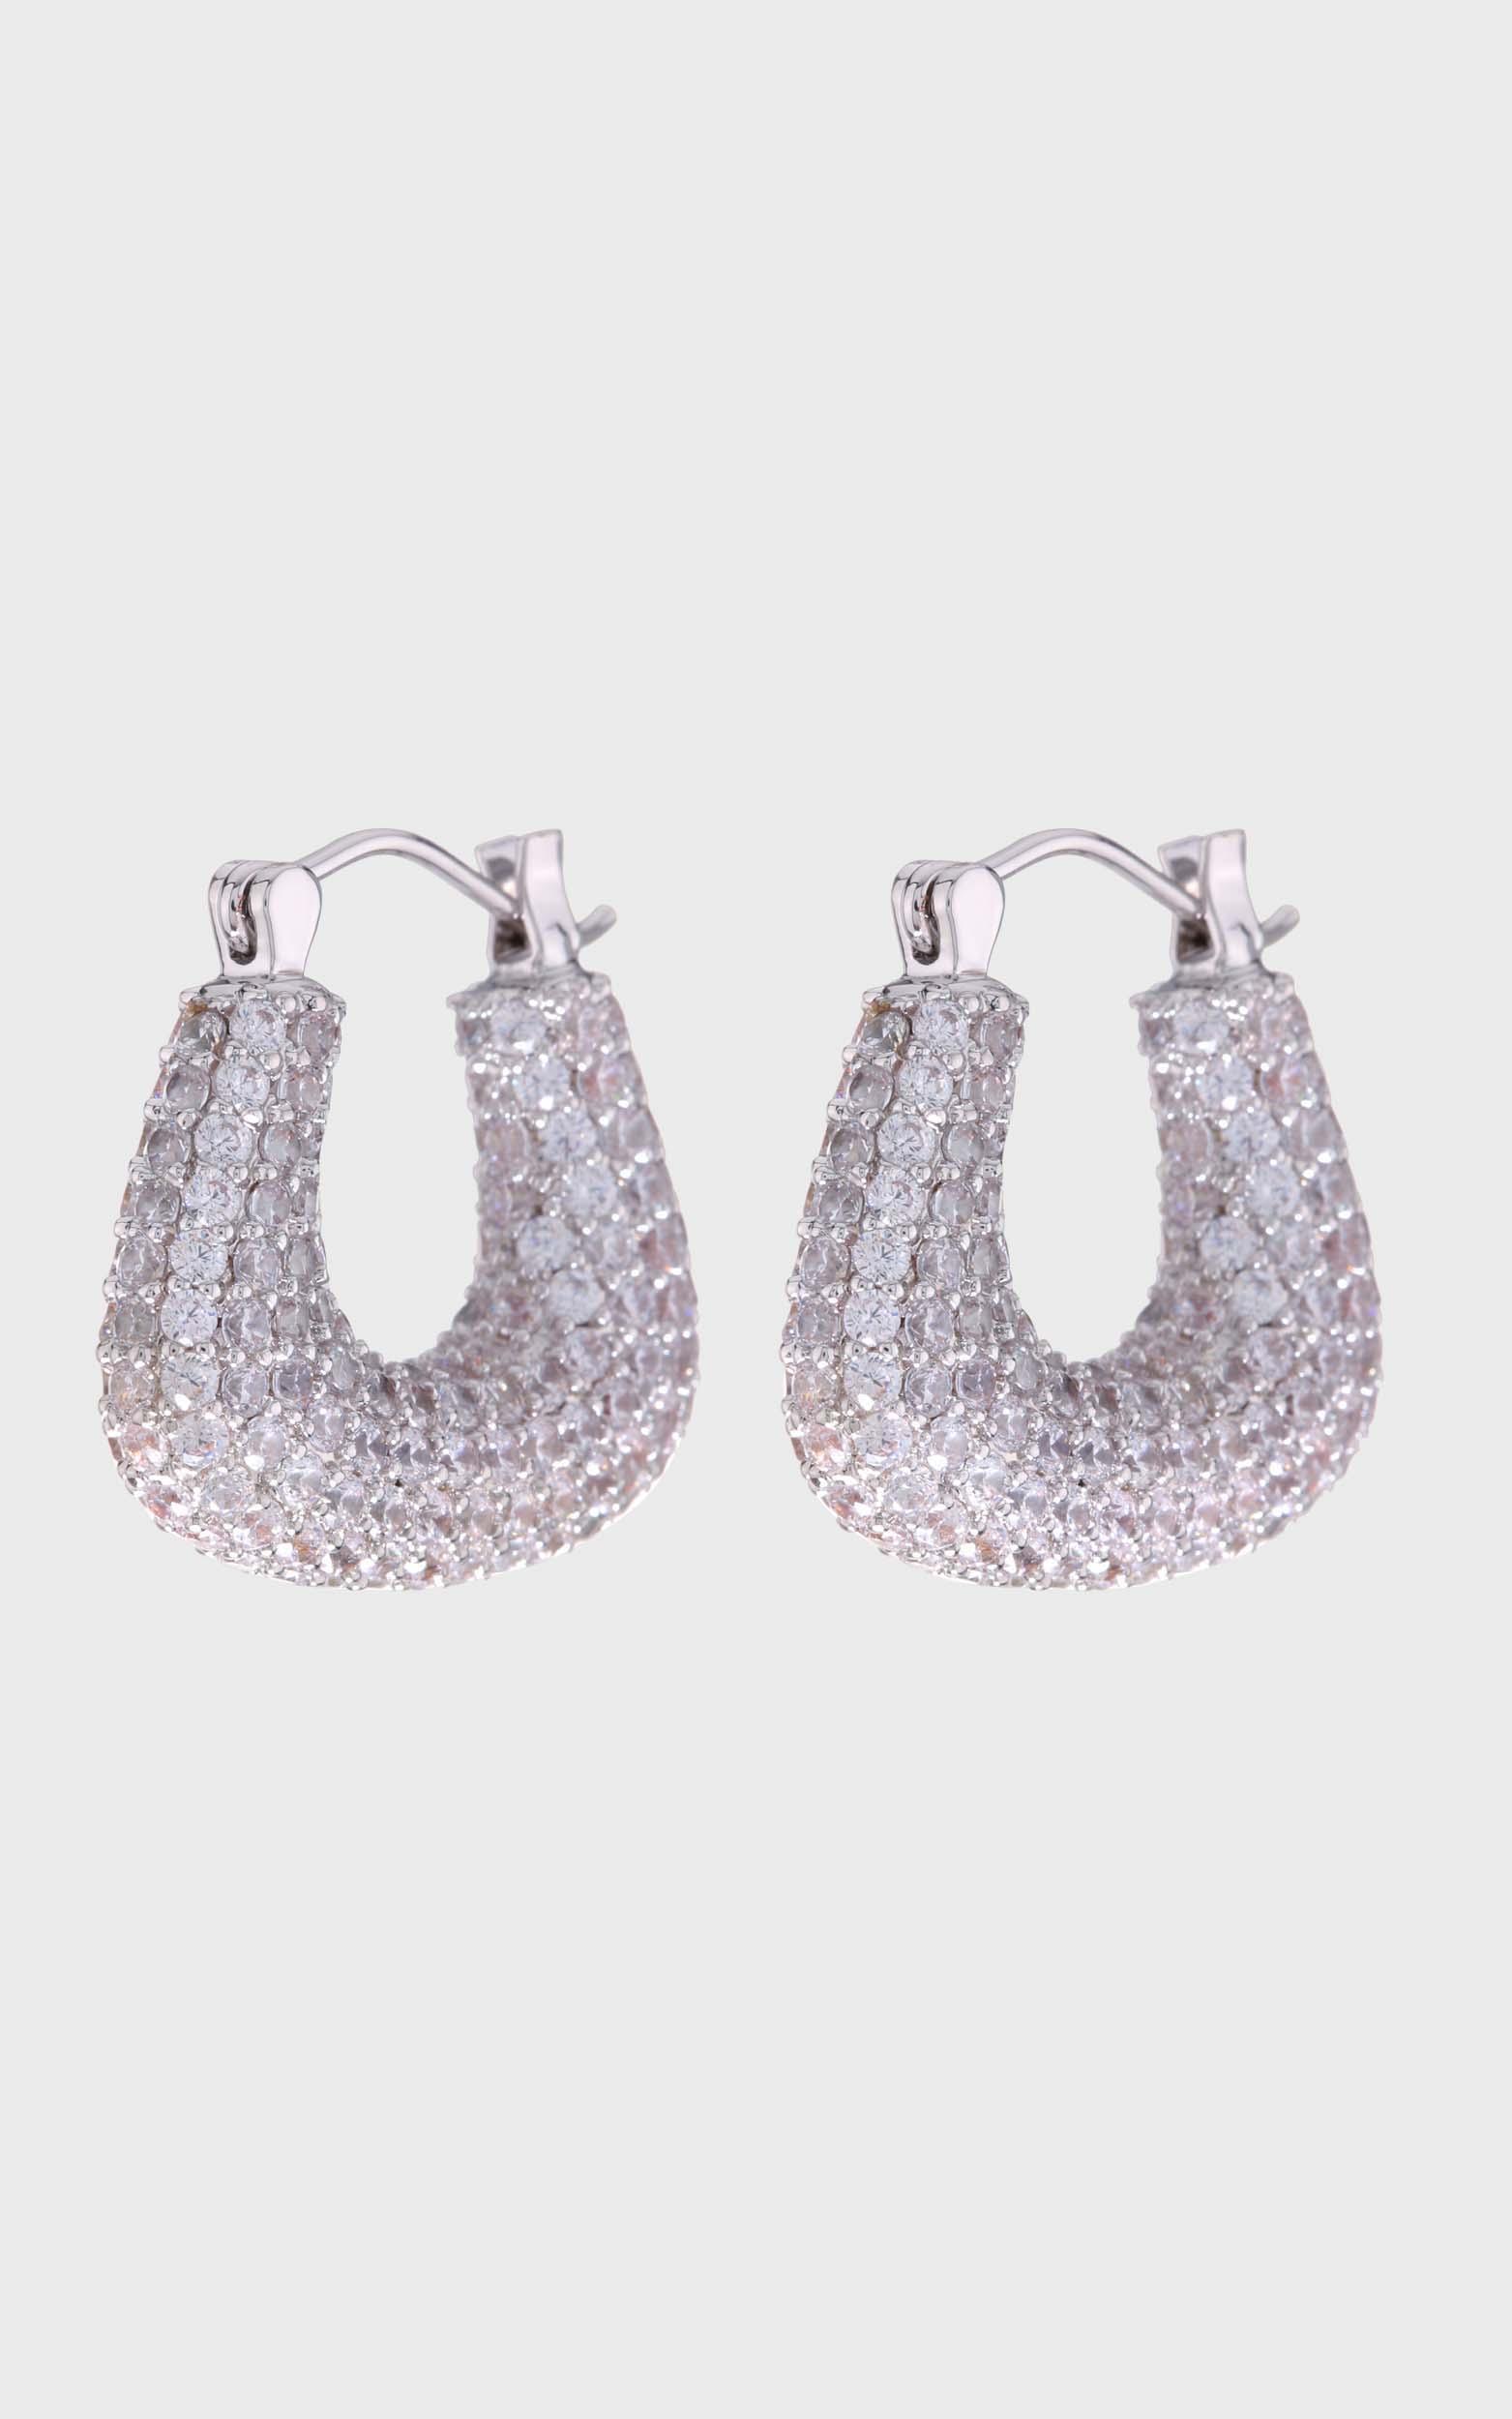 Luv AJ - Pave Tia Hoops in Silver, , hi-res image number null